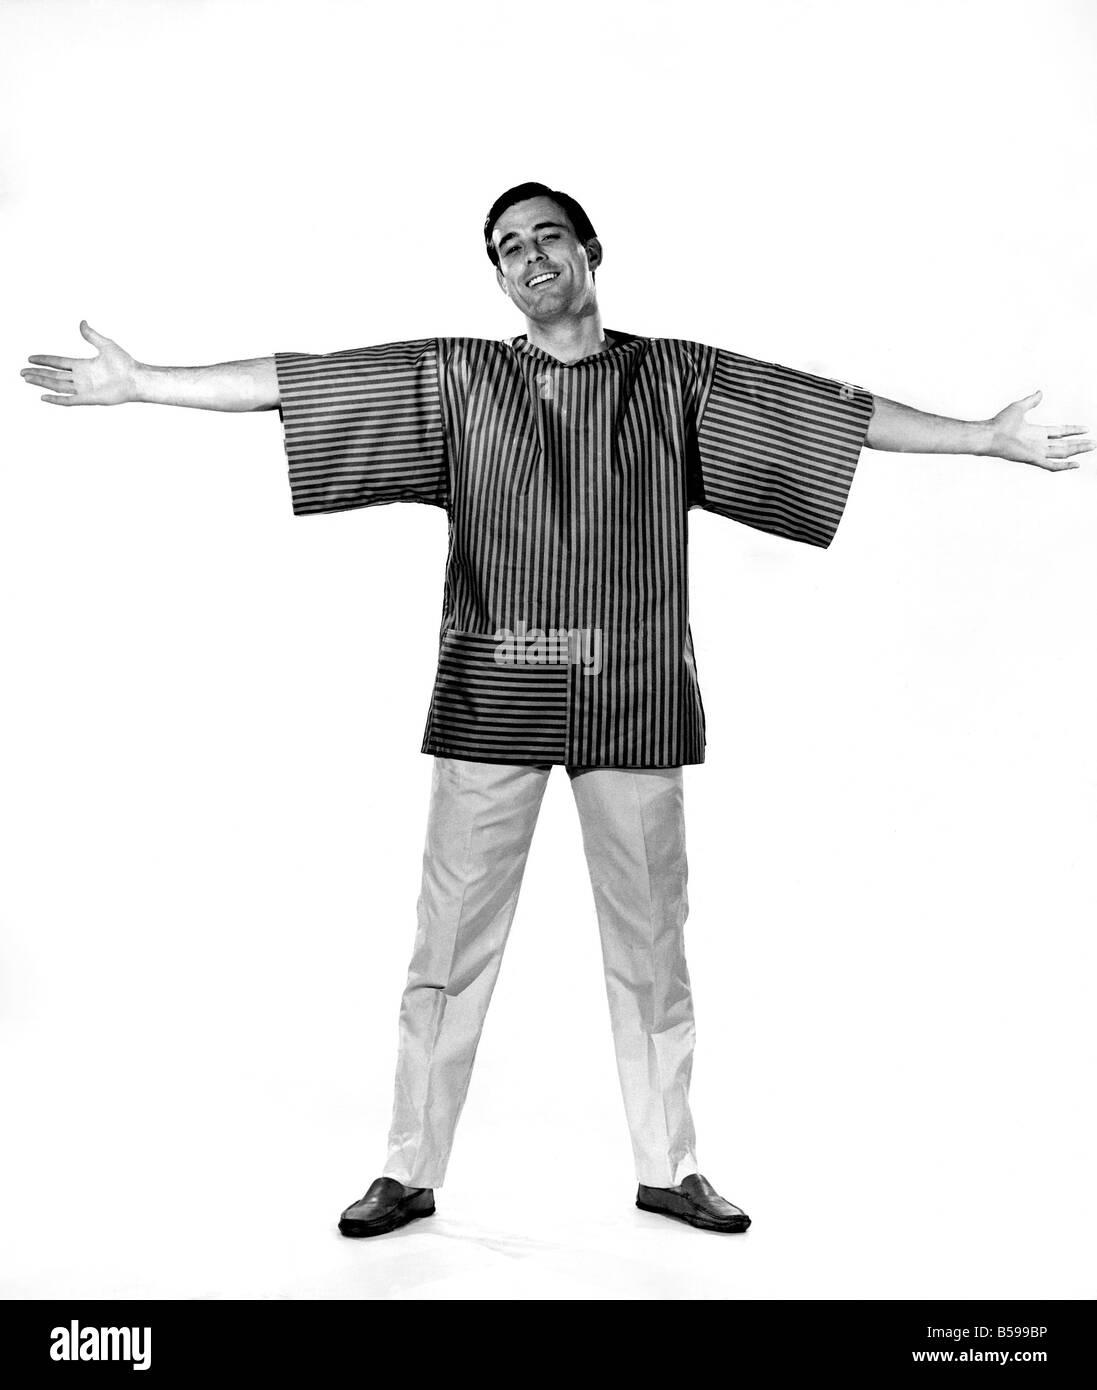 Reveille Fashions 1963: Peter Anthony models a loose fitting striped beach shirt. June 1963 P007623 Stock Photo